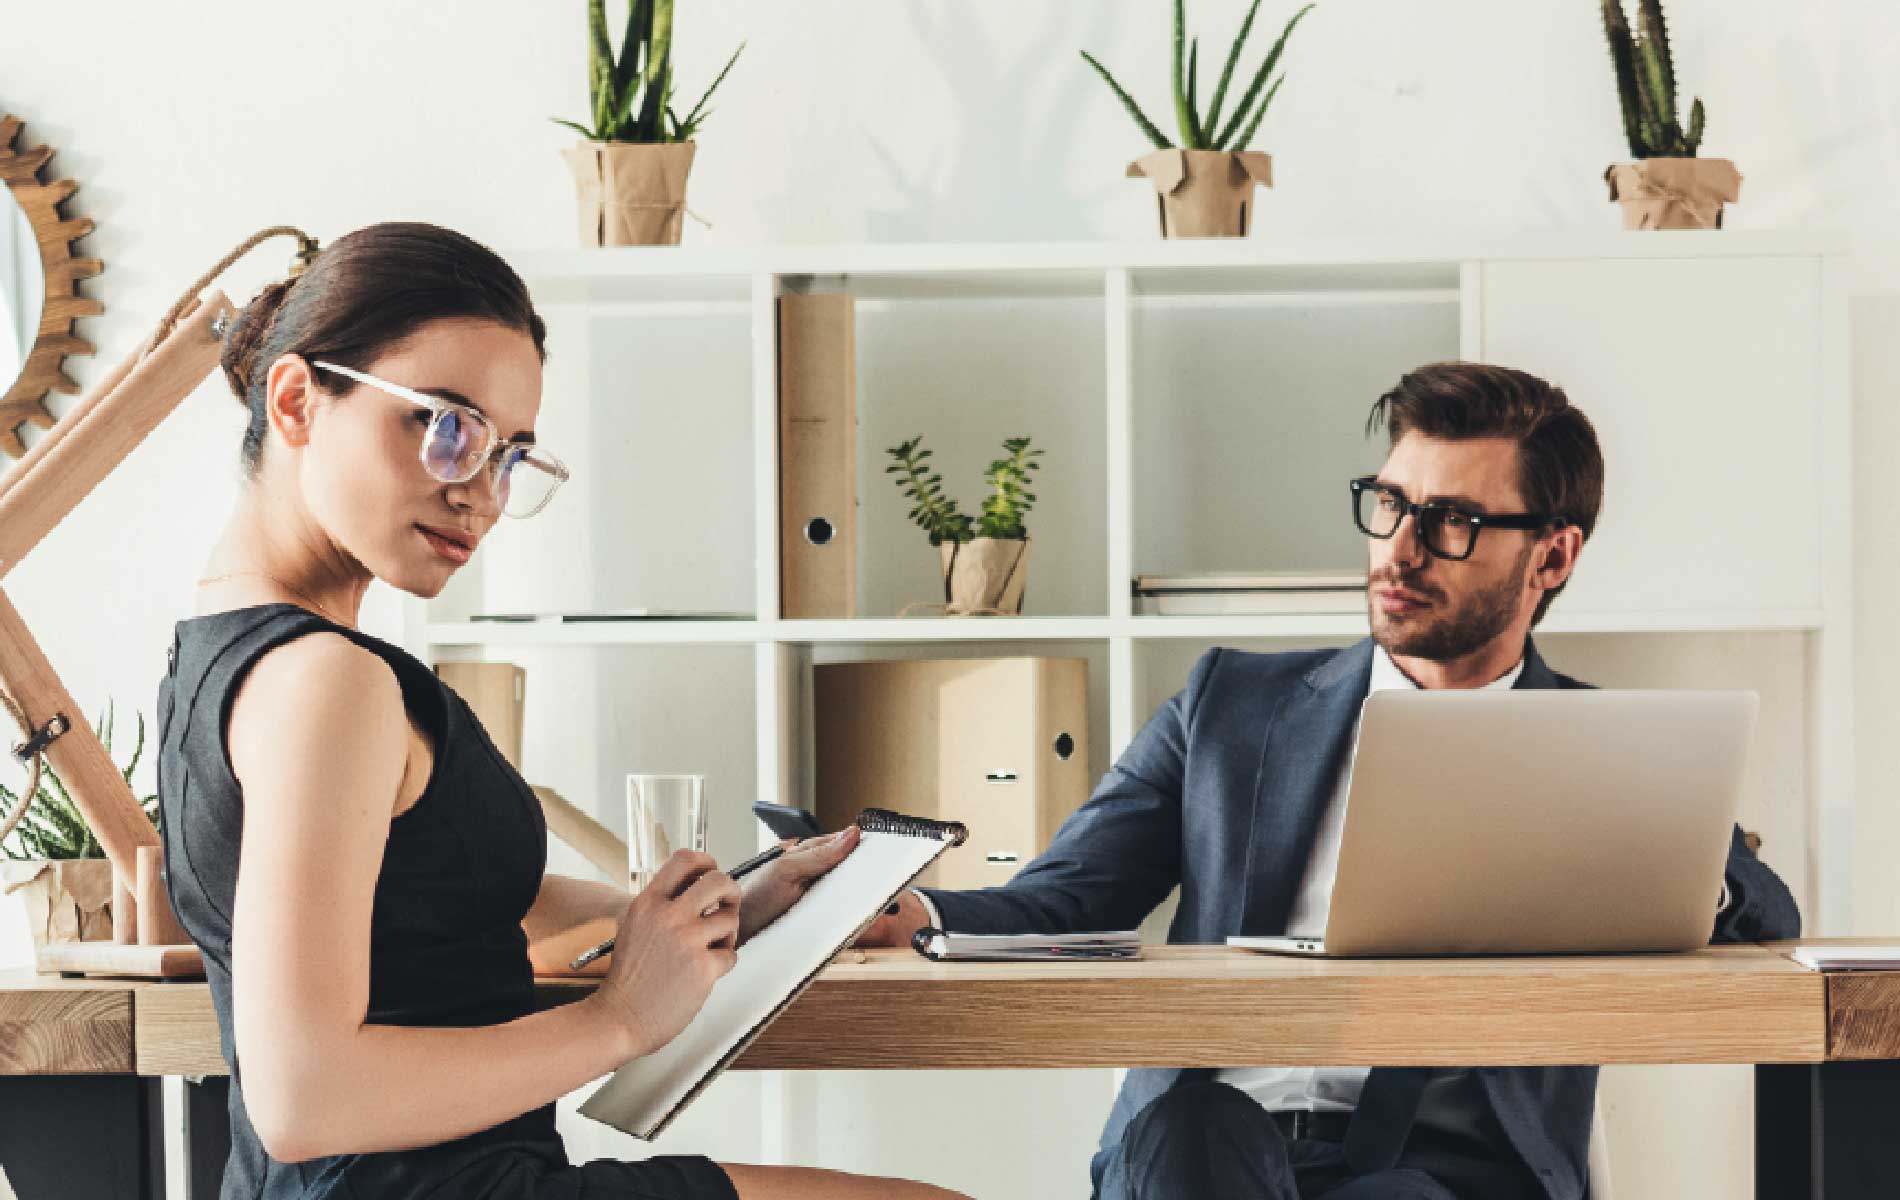 Man and woman in a office wearing glasses